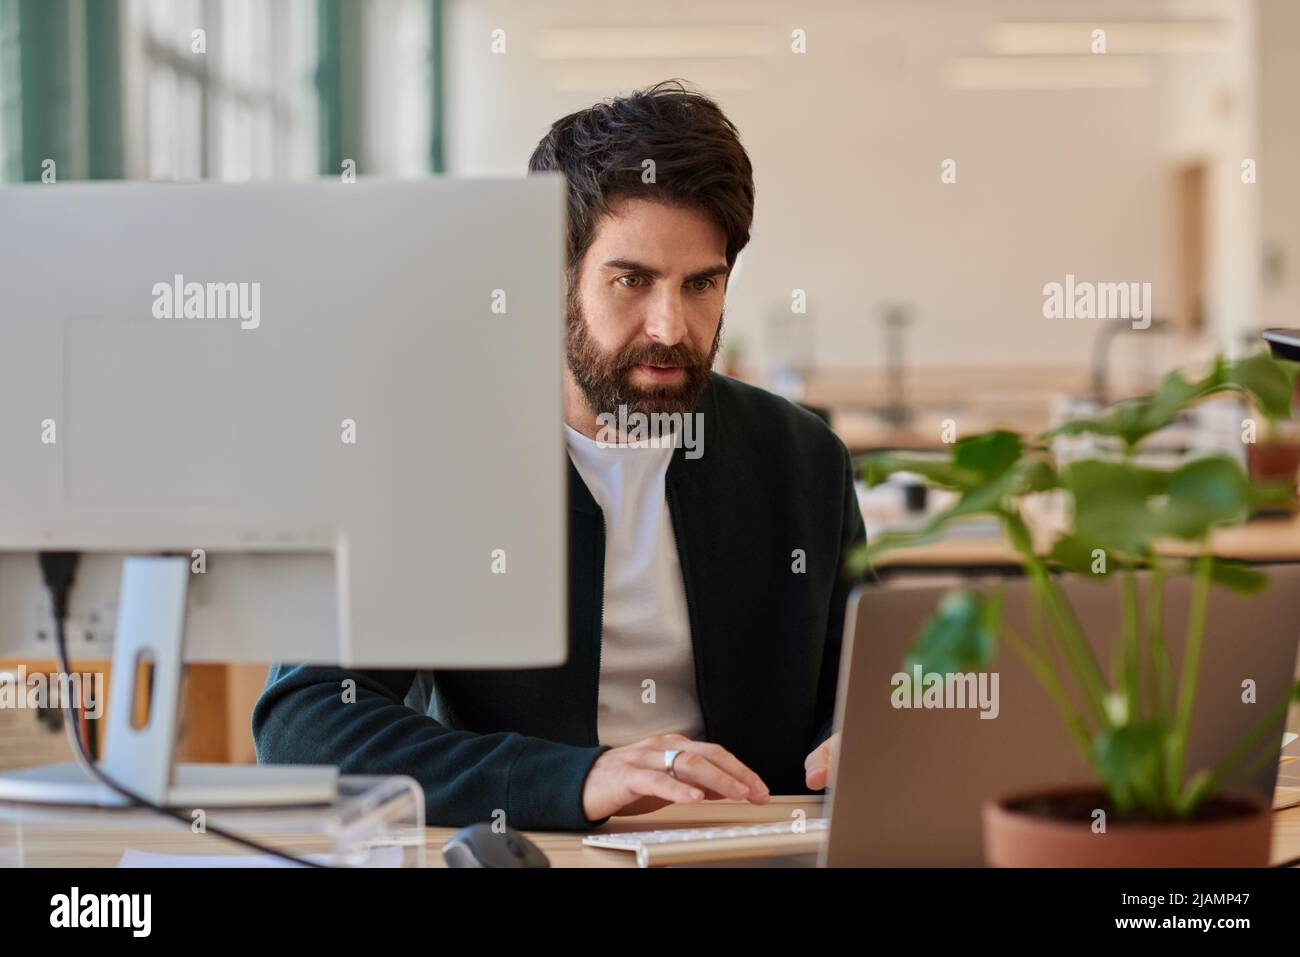 Focused young businessman working on a laptop at his office desk Stock Photo